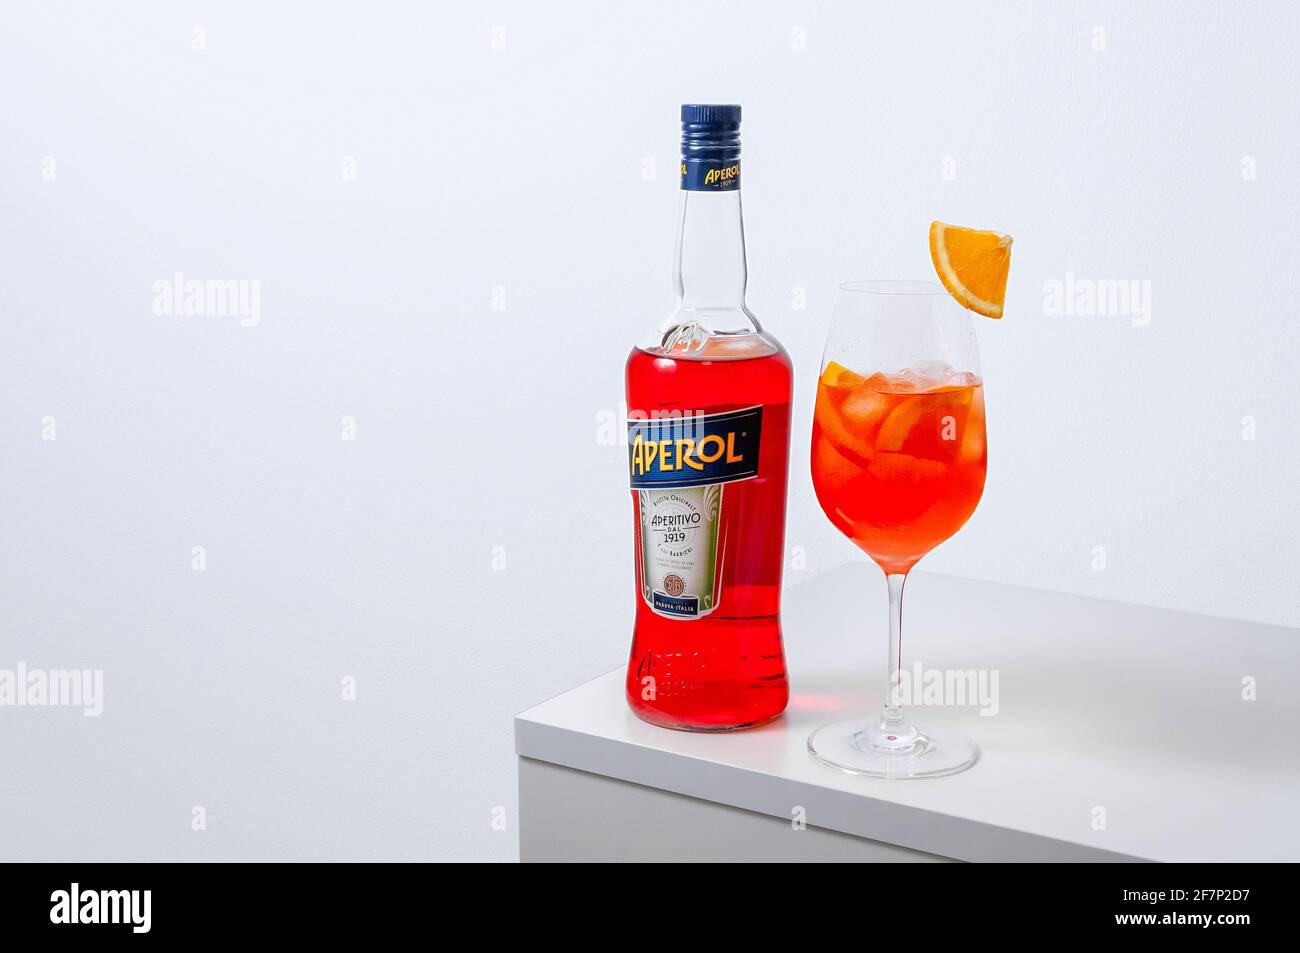 Lugansk, Ukraine - March 29, 2021: Aperol Spritz Cocktail. Aperol in bottle and wine glass with ice on white background. Long fizzy drink. Minimal cre Stock Photo